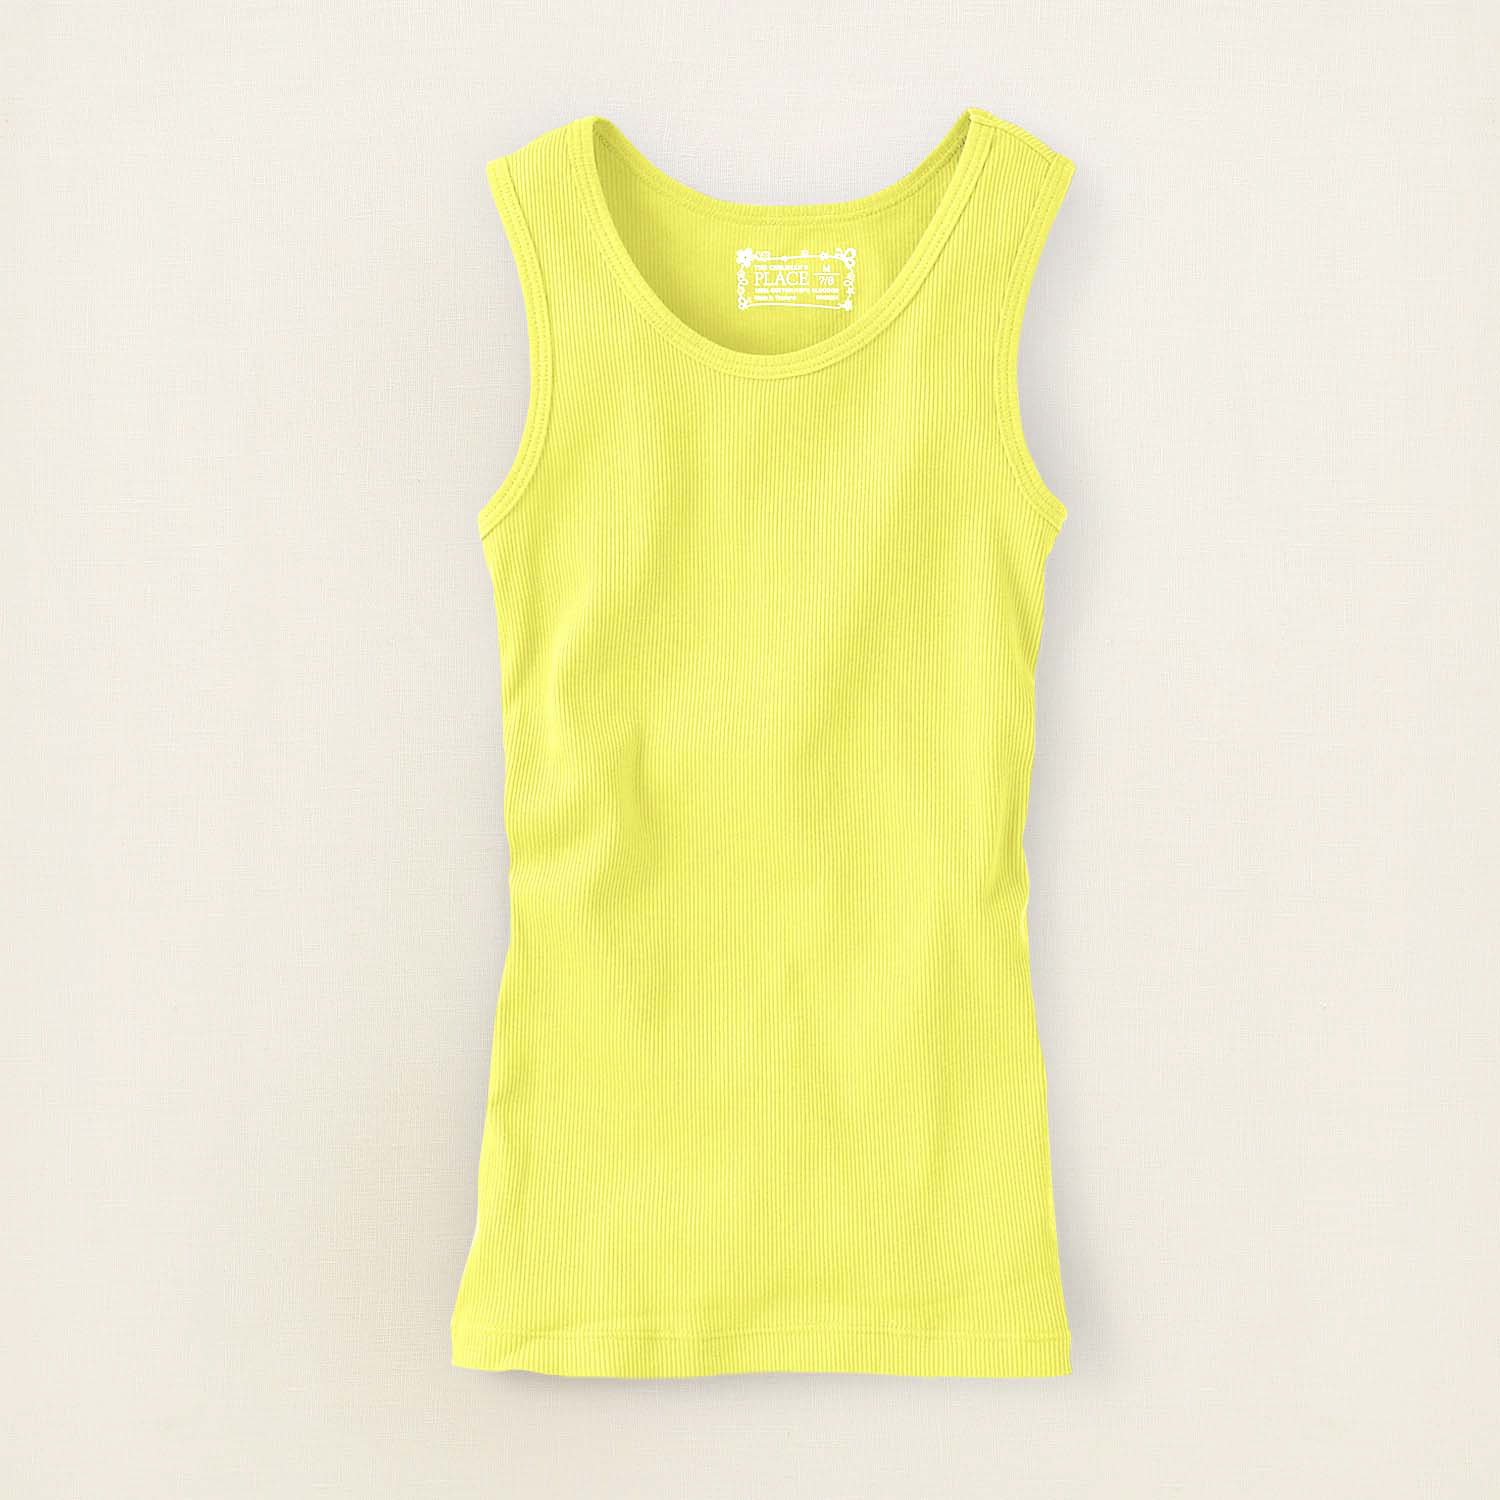 The Children's Place
A neon yellow tank top and a neon orange skirt.